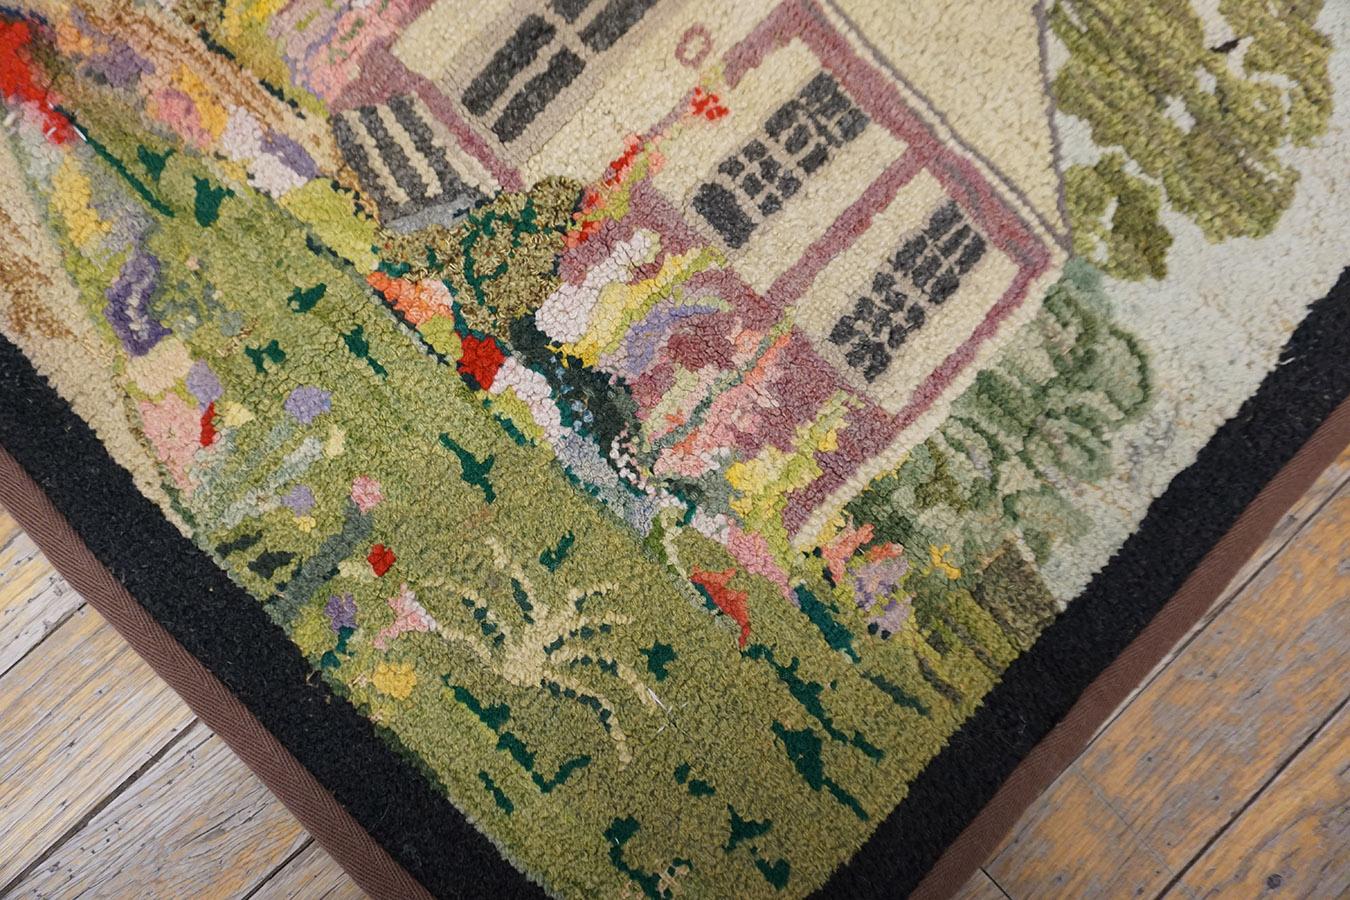 Mid 20th Century Pictorial American Hooked Rug ( 2'1